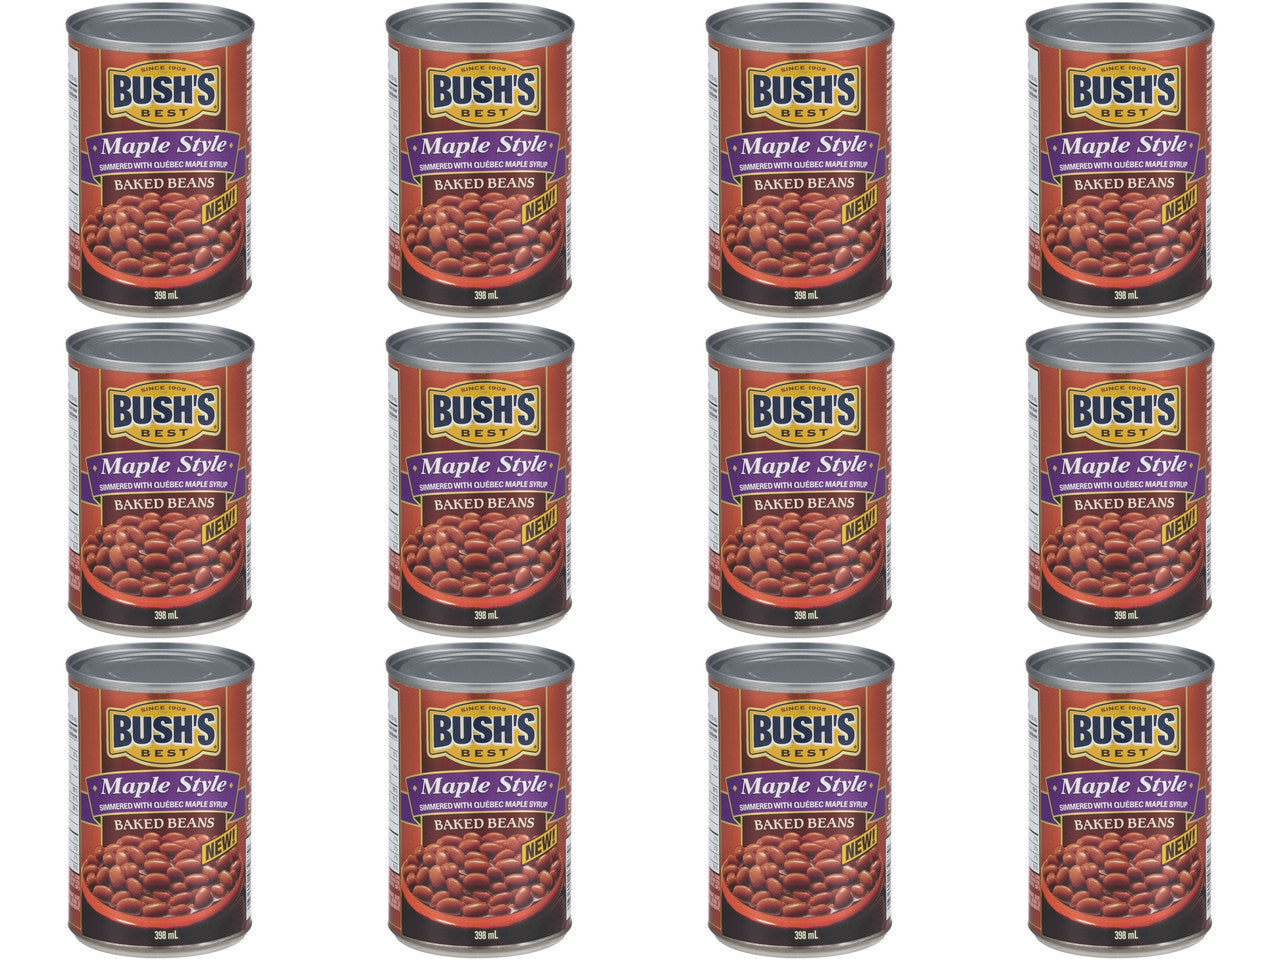 Bush's Best Maple Style Baked Beans/Quebec Maple Syrup 398ml/13.5oz., (12pk) (Imported from Canada)